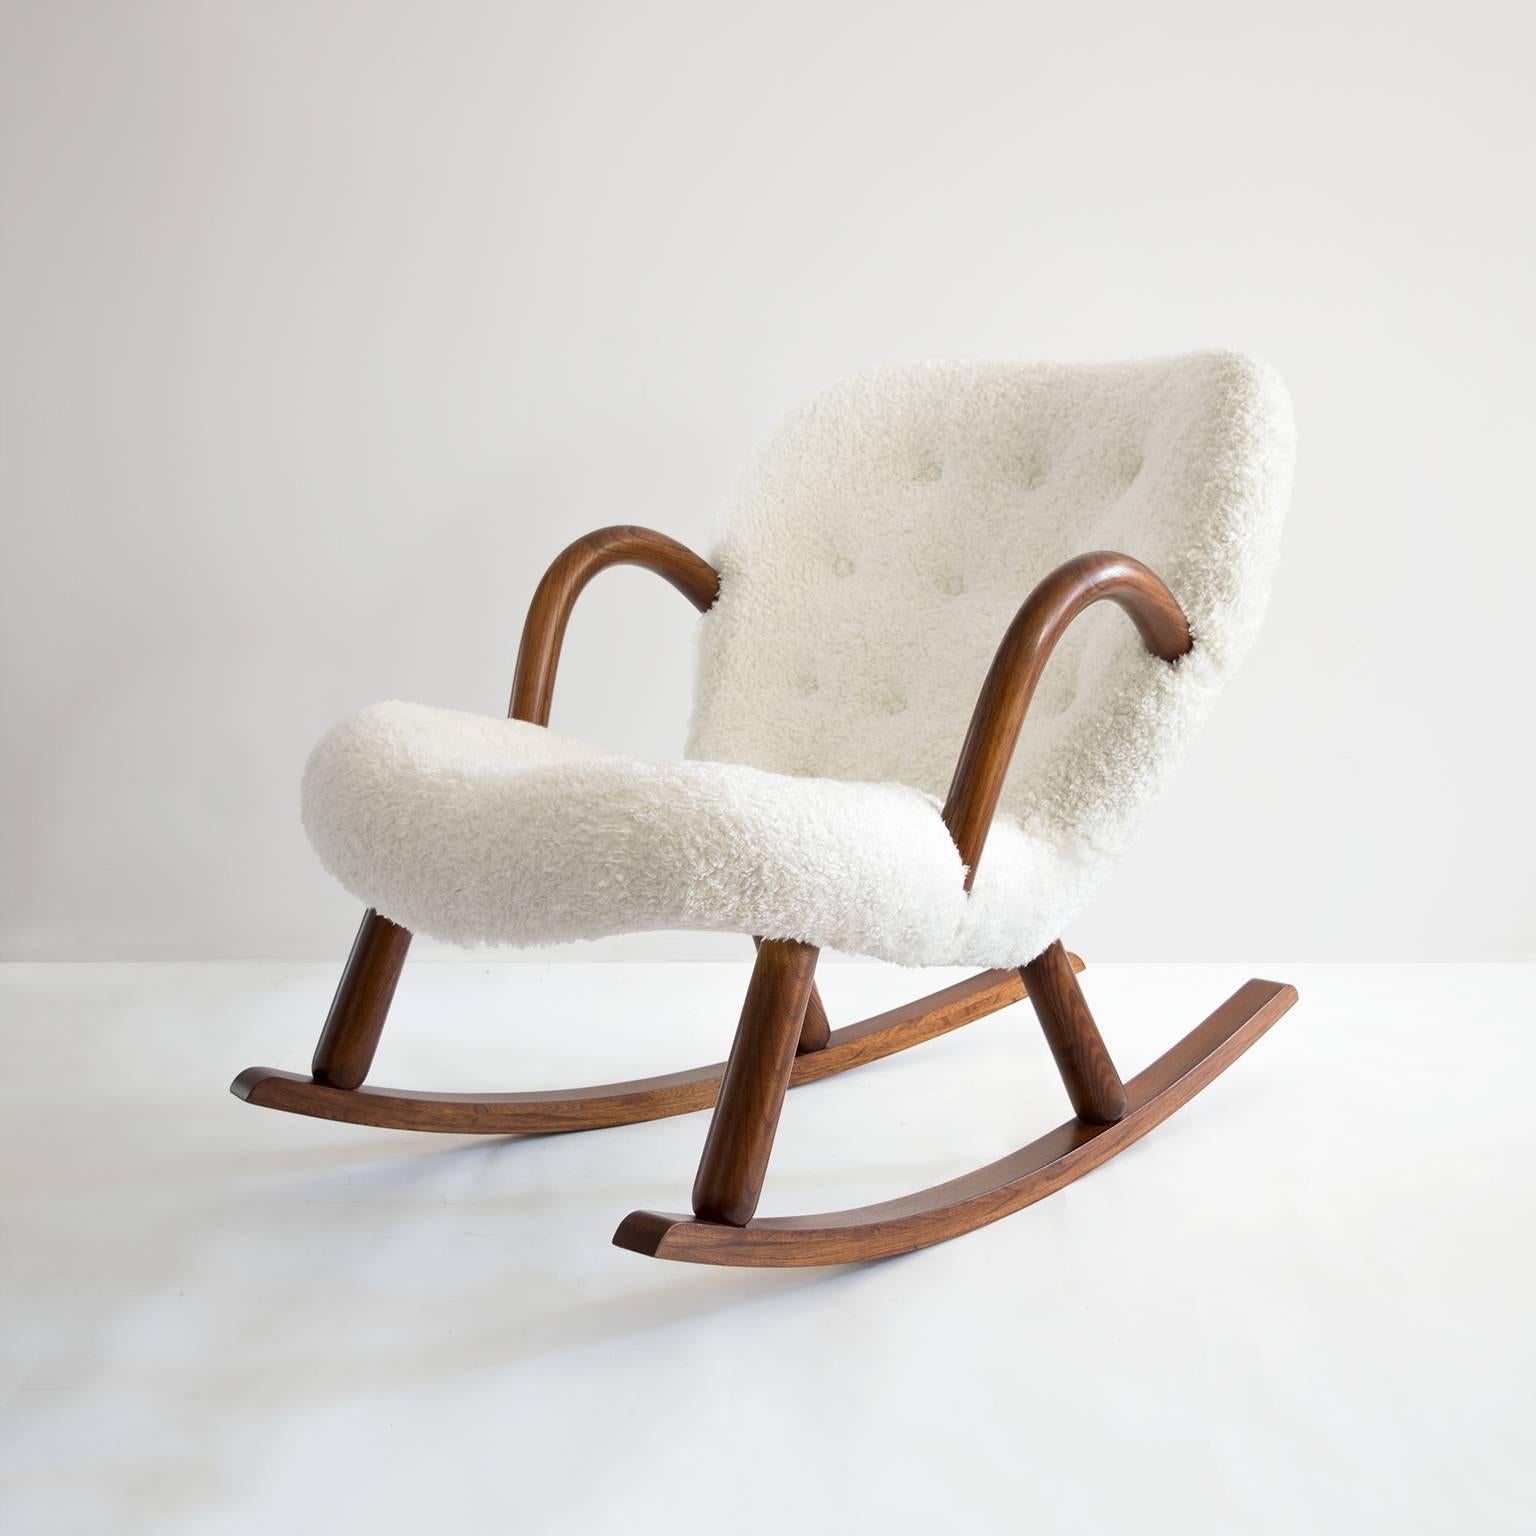 Scandinavian modern armchair designed by Phillip Arctander and first introduced circa 1944 and produced by Nordisk Staal & Mobel Central, Denmark. Chair is constructed of stained beechwood. Newly restored and reupholstered in 